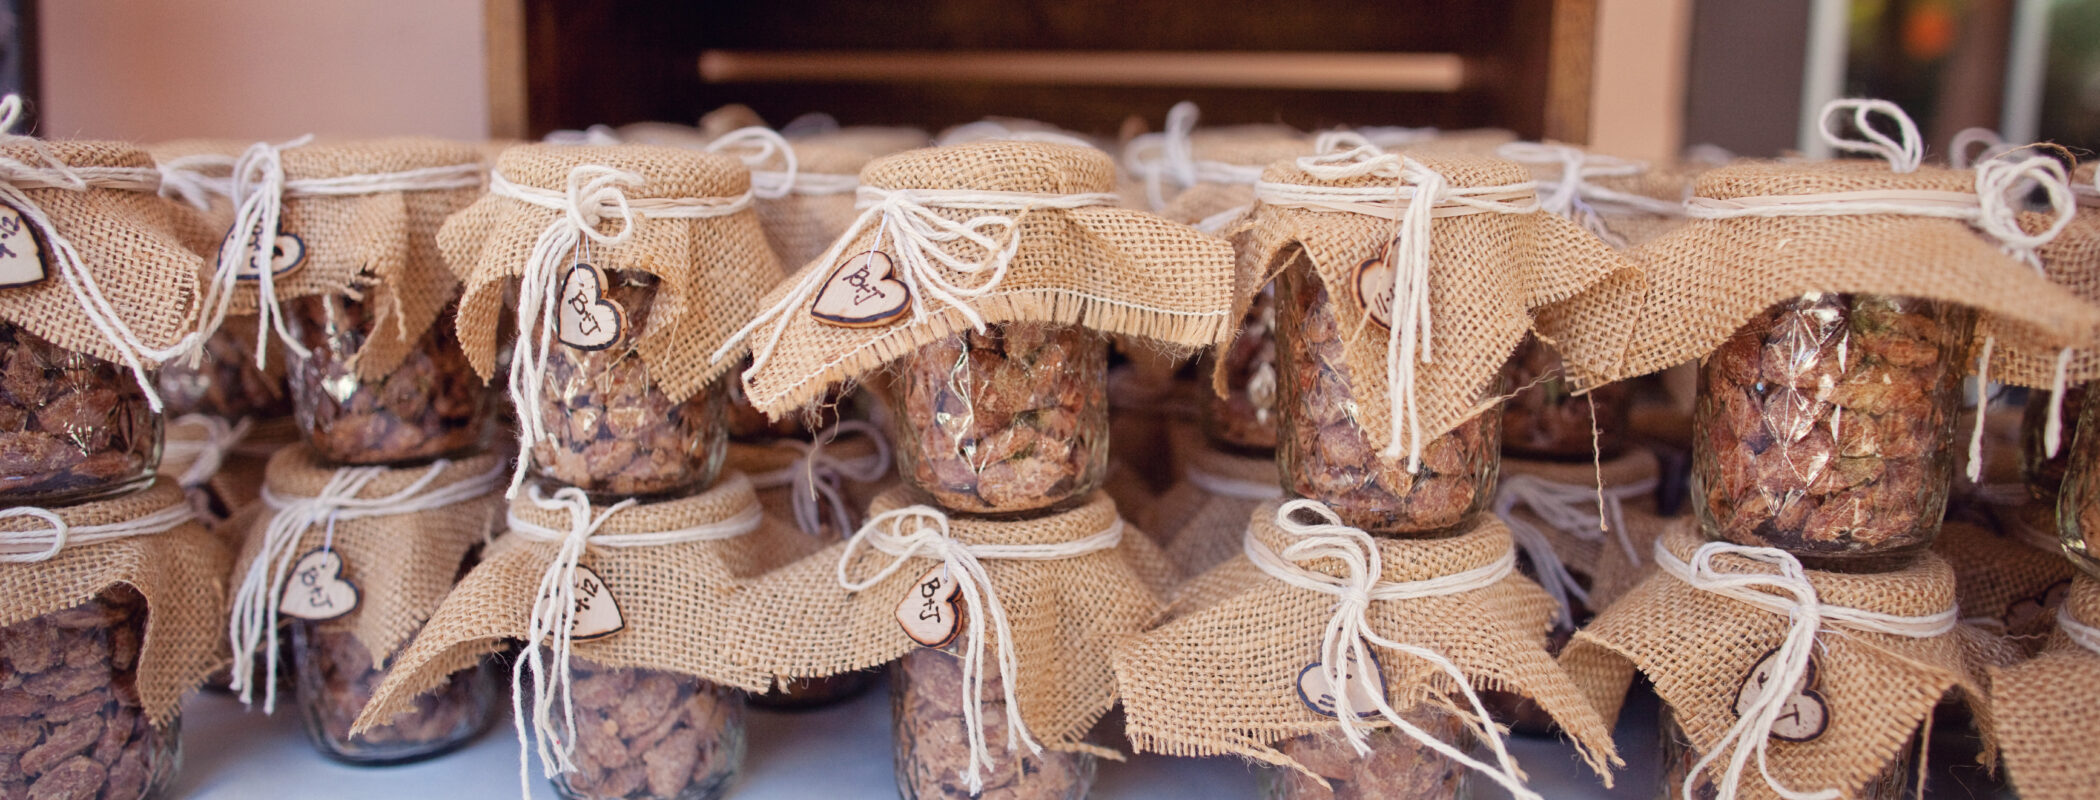 Wedding Favor Ideas to Remember featured image